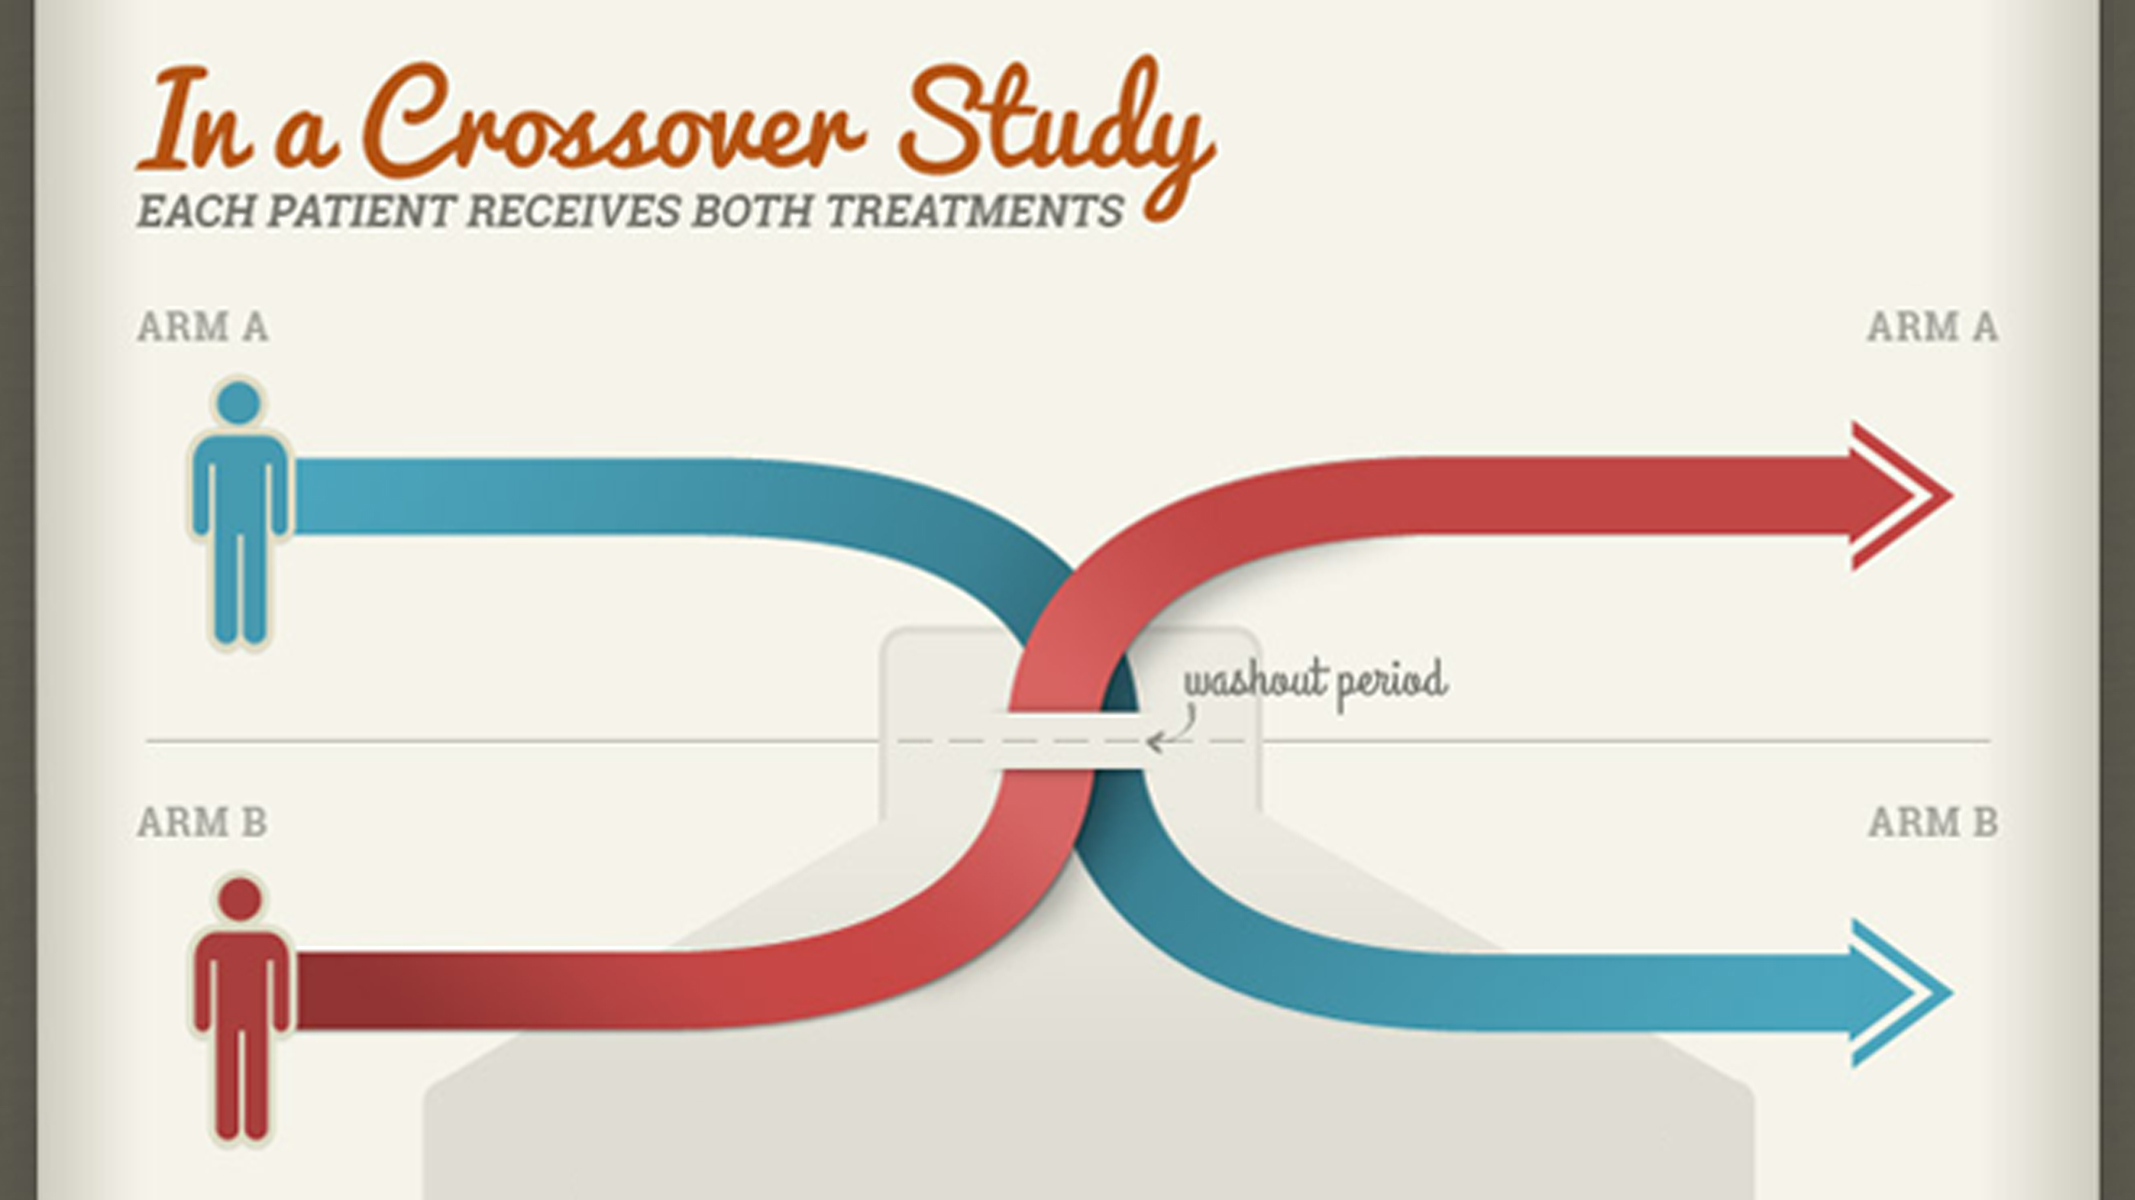 Clinical Trial Design: Parallel and Crossover Studies | Lilly